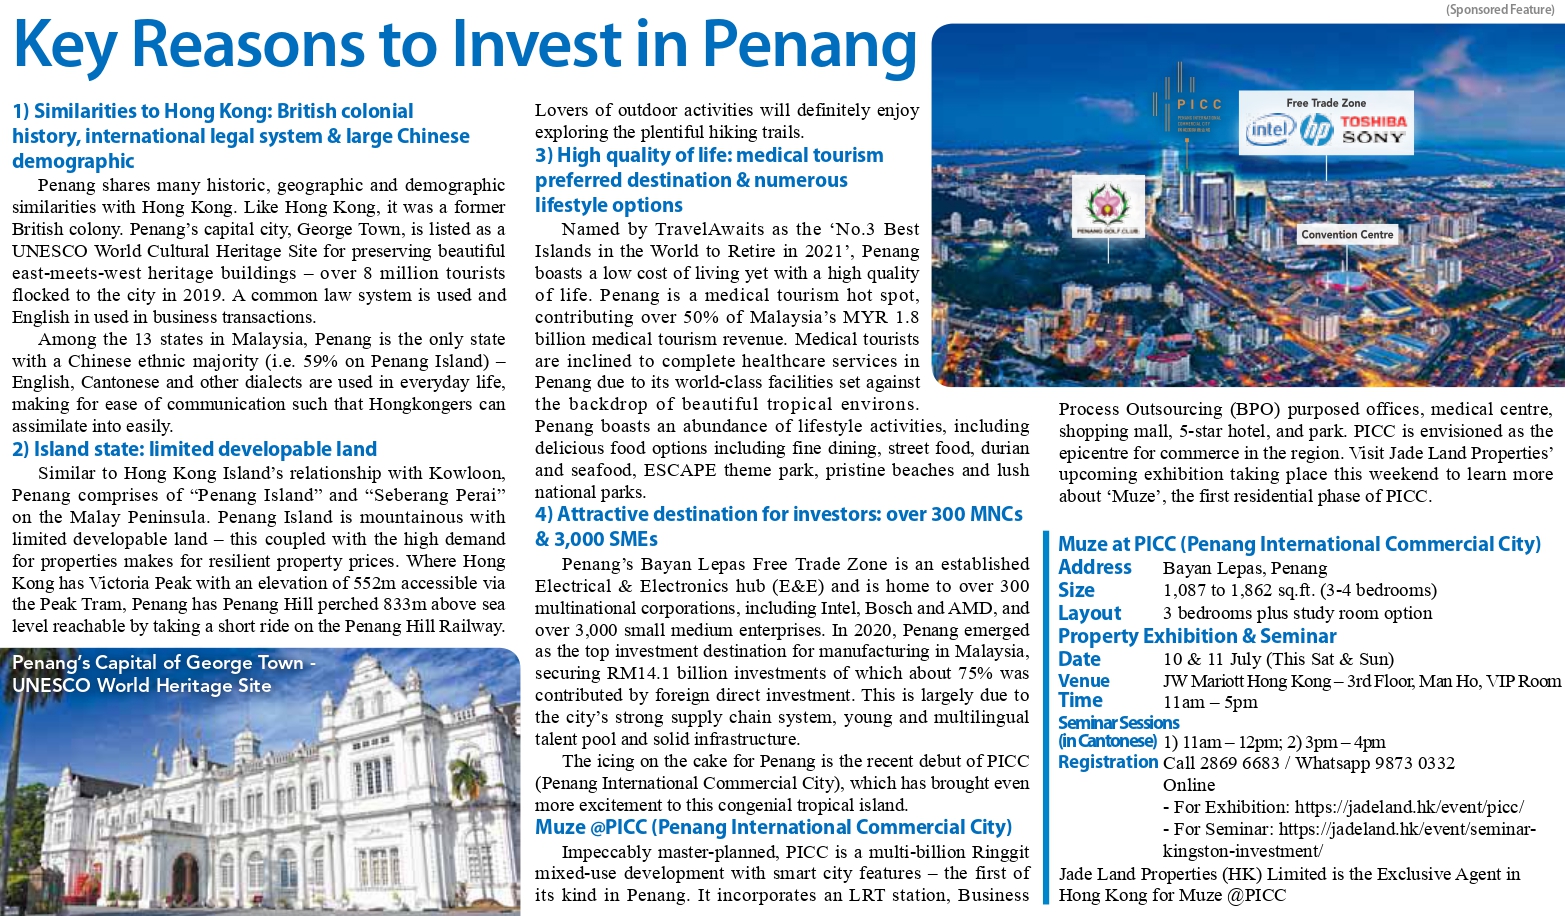 The Standard - Key Reasons to invest in Penang